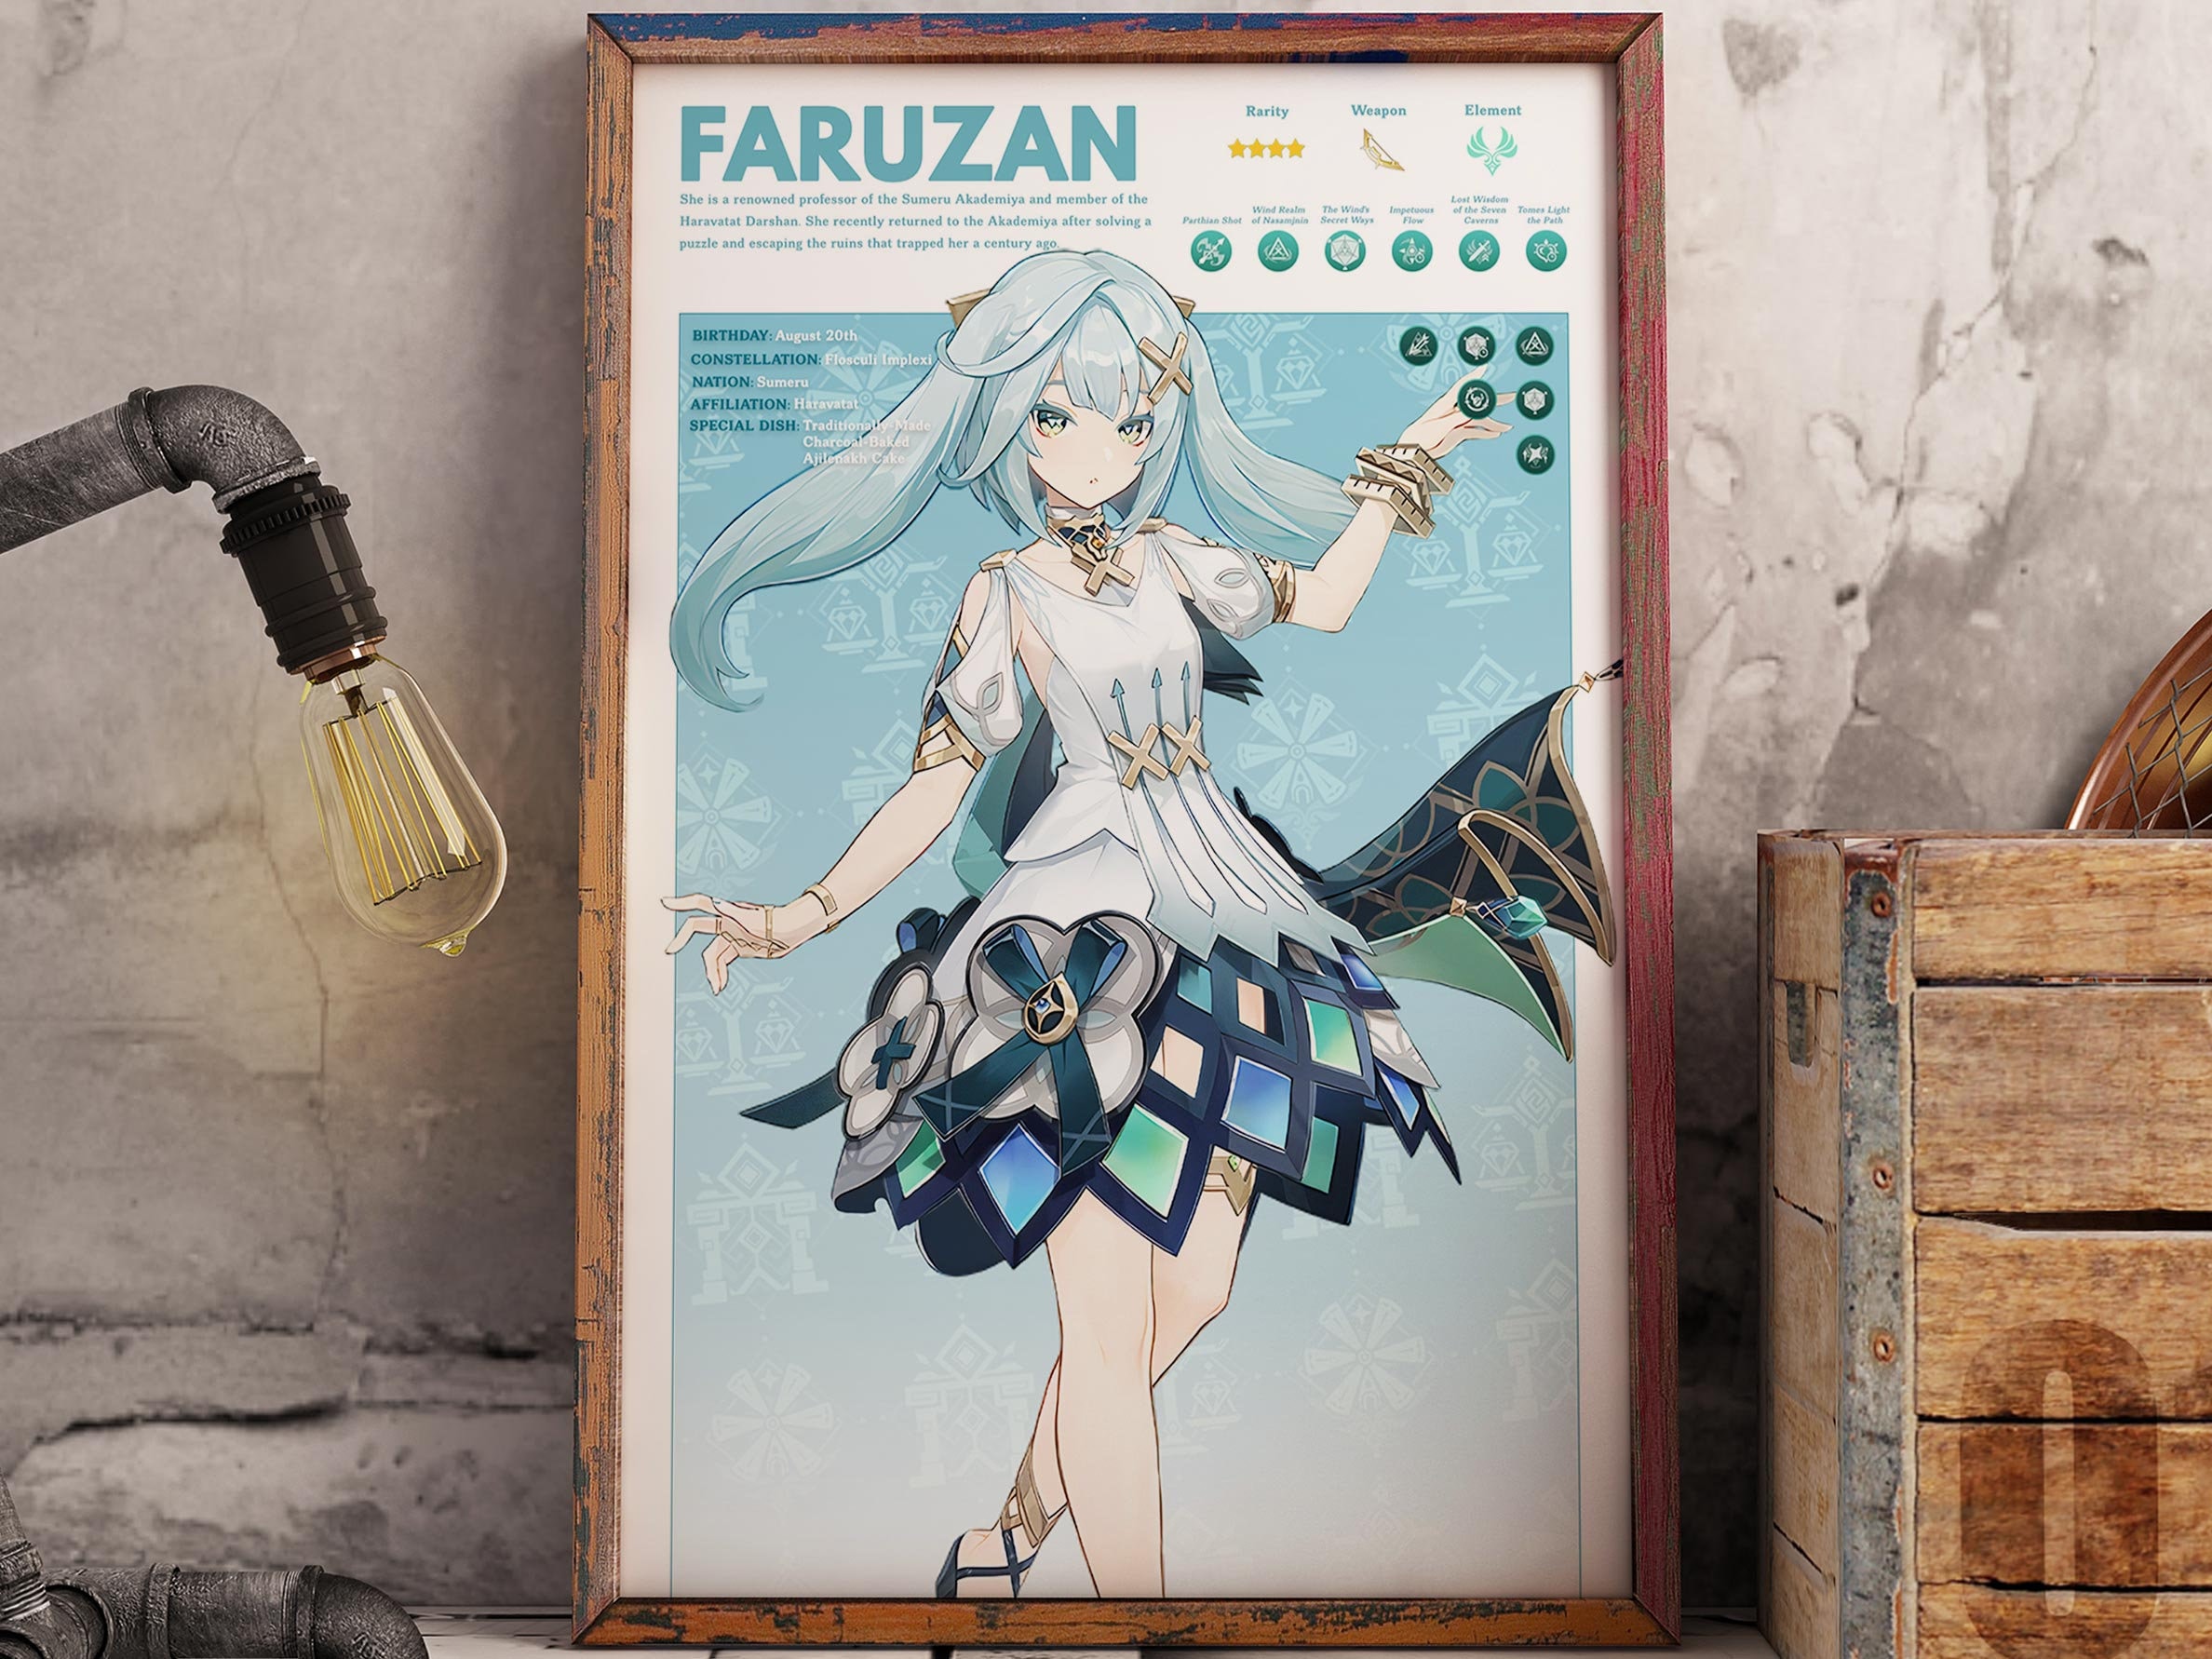 Anime Girl Names Posters for Sale